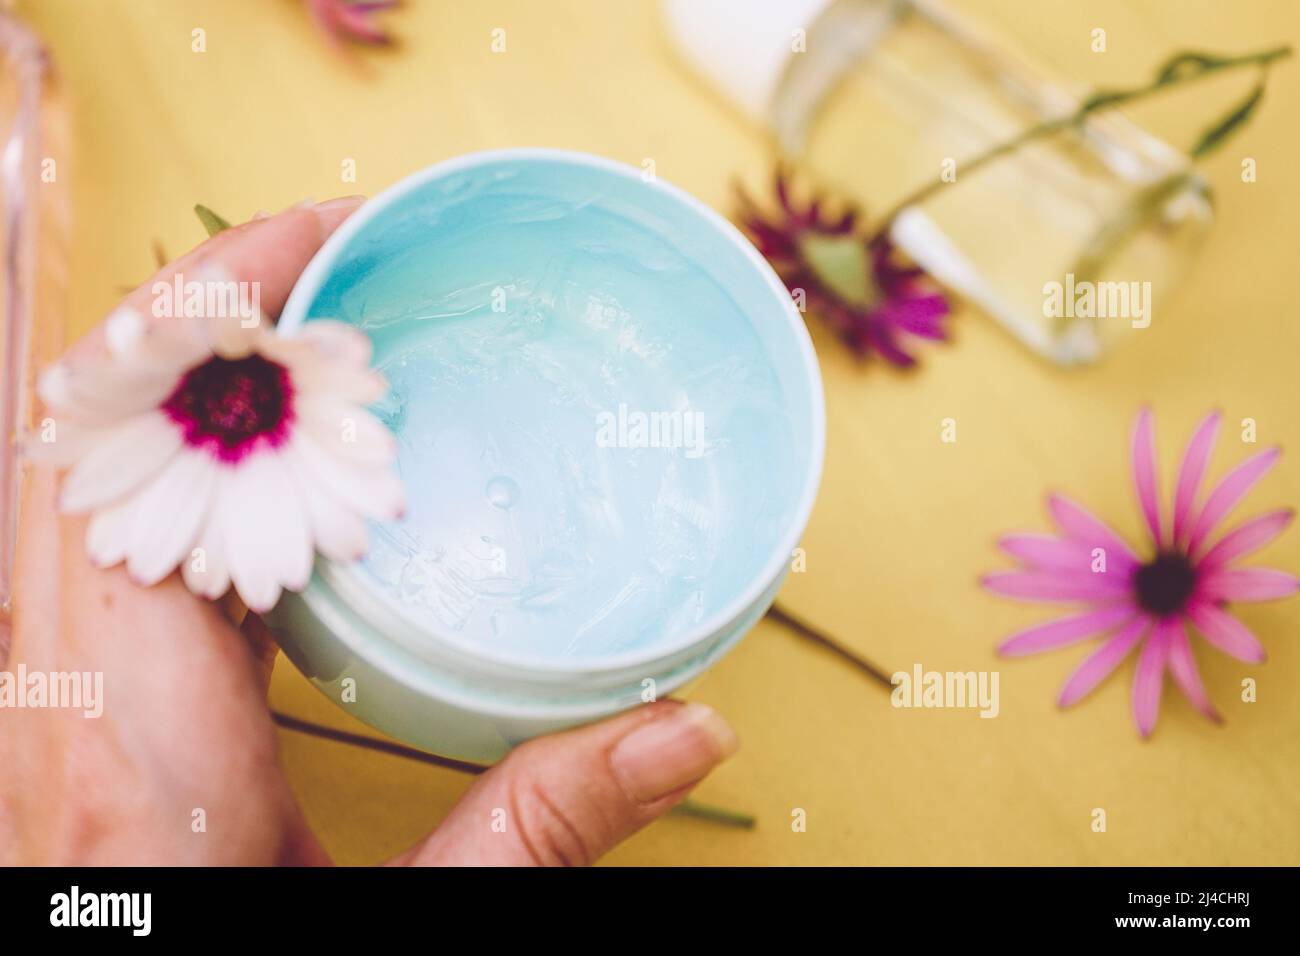 Still life of eco cosmetics with fresh flowers Stock Photo